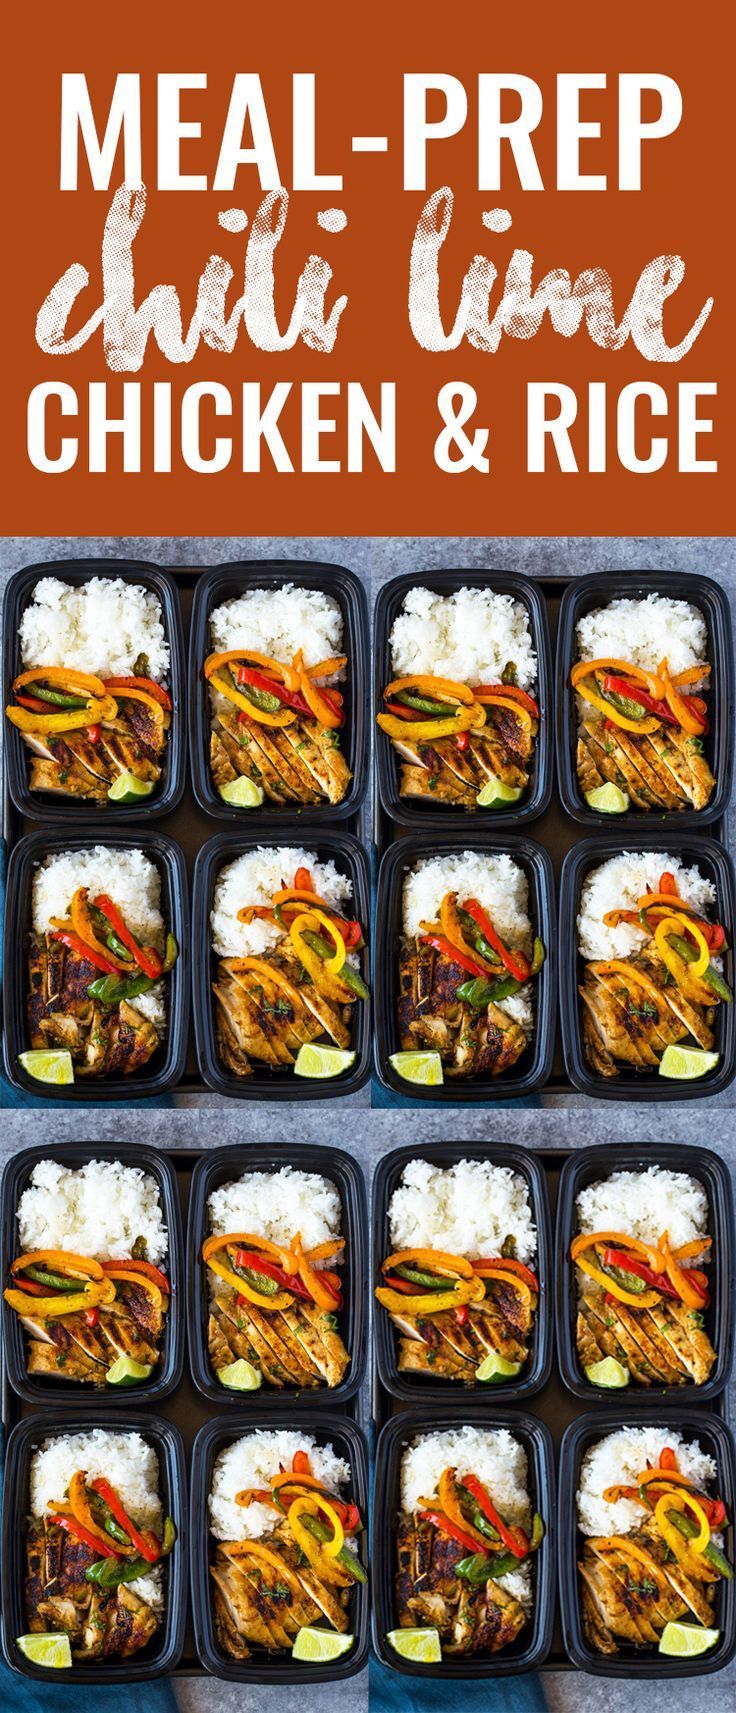 Chili Lime Chicken and Rice Meal Prep Bowls - Chili Lime Chicken and Rice Meal Prep Bowls -   18 meal prep recipes vegetarian fitness ideas